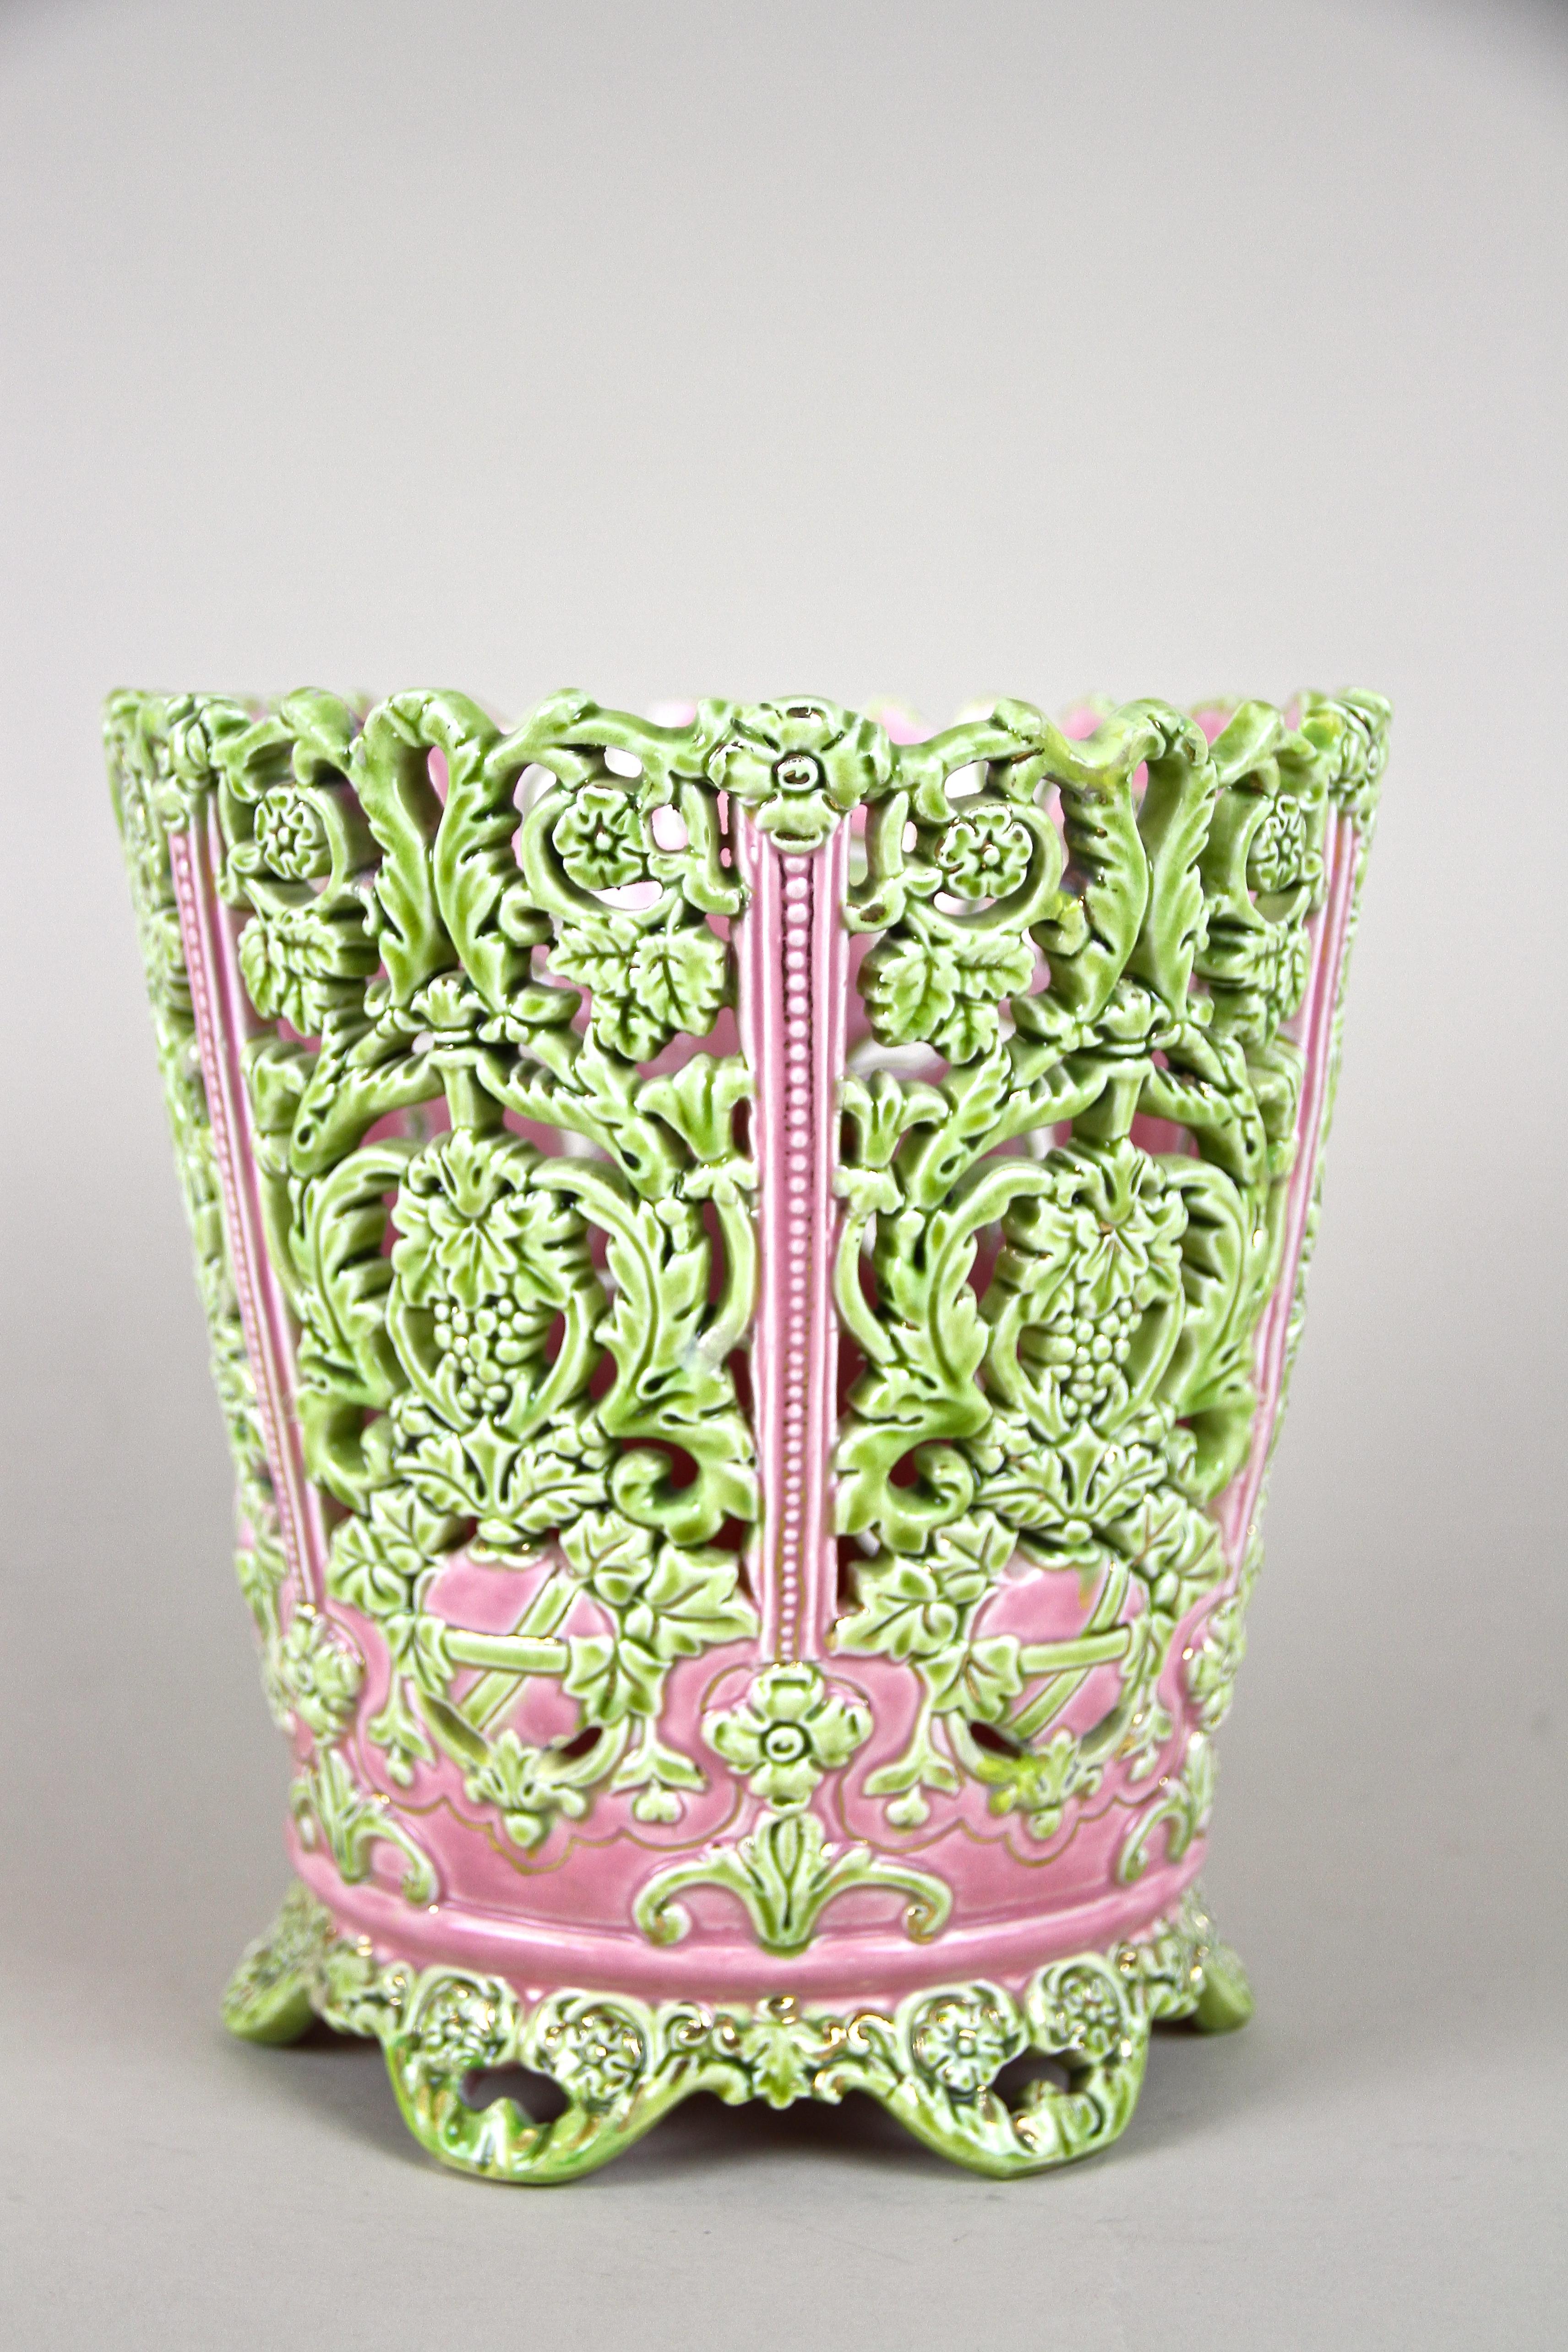 Very decorative ornamental Art Nouveau Majolica Cachepot manufactured in around 1900 in Bodenbach/ Bohemia by the well known majolica company of Gerbing & Stephan. This amazing, open worked cachepot impresses with carefully crafted, elaborate and